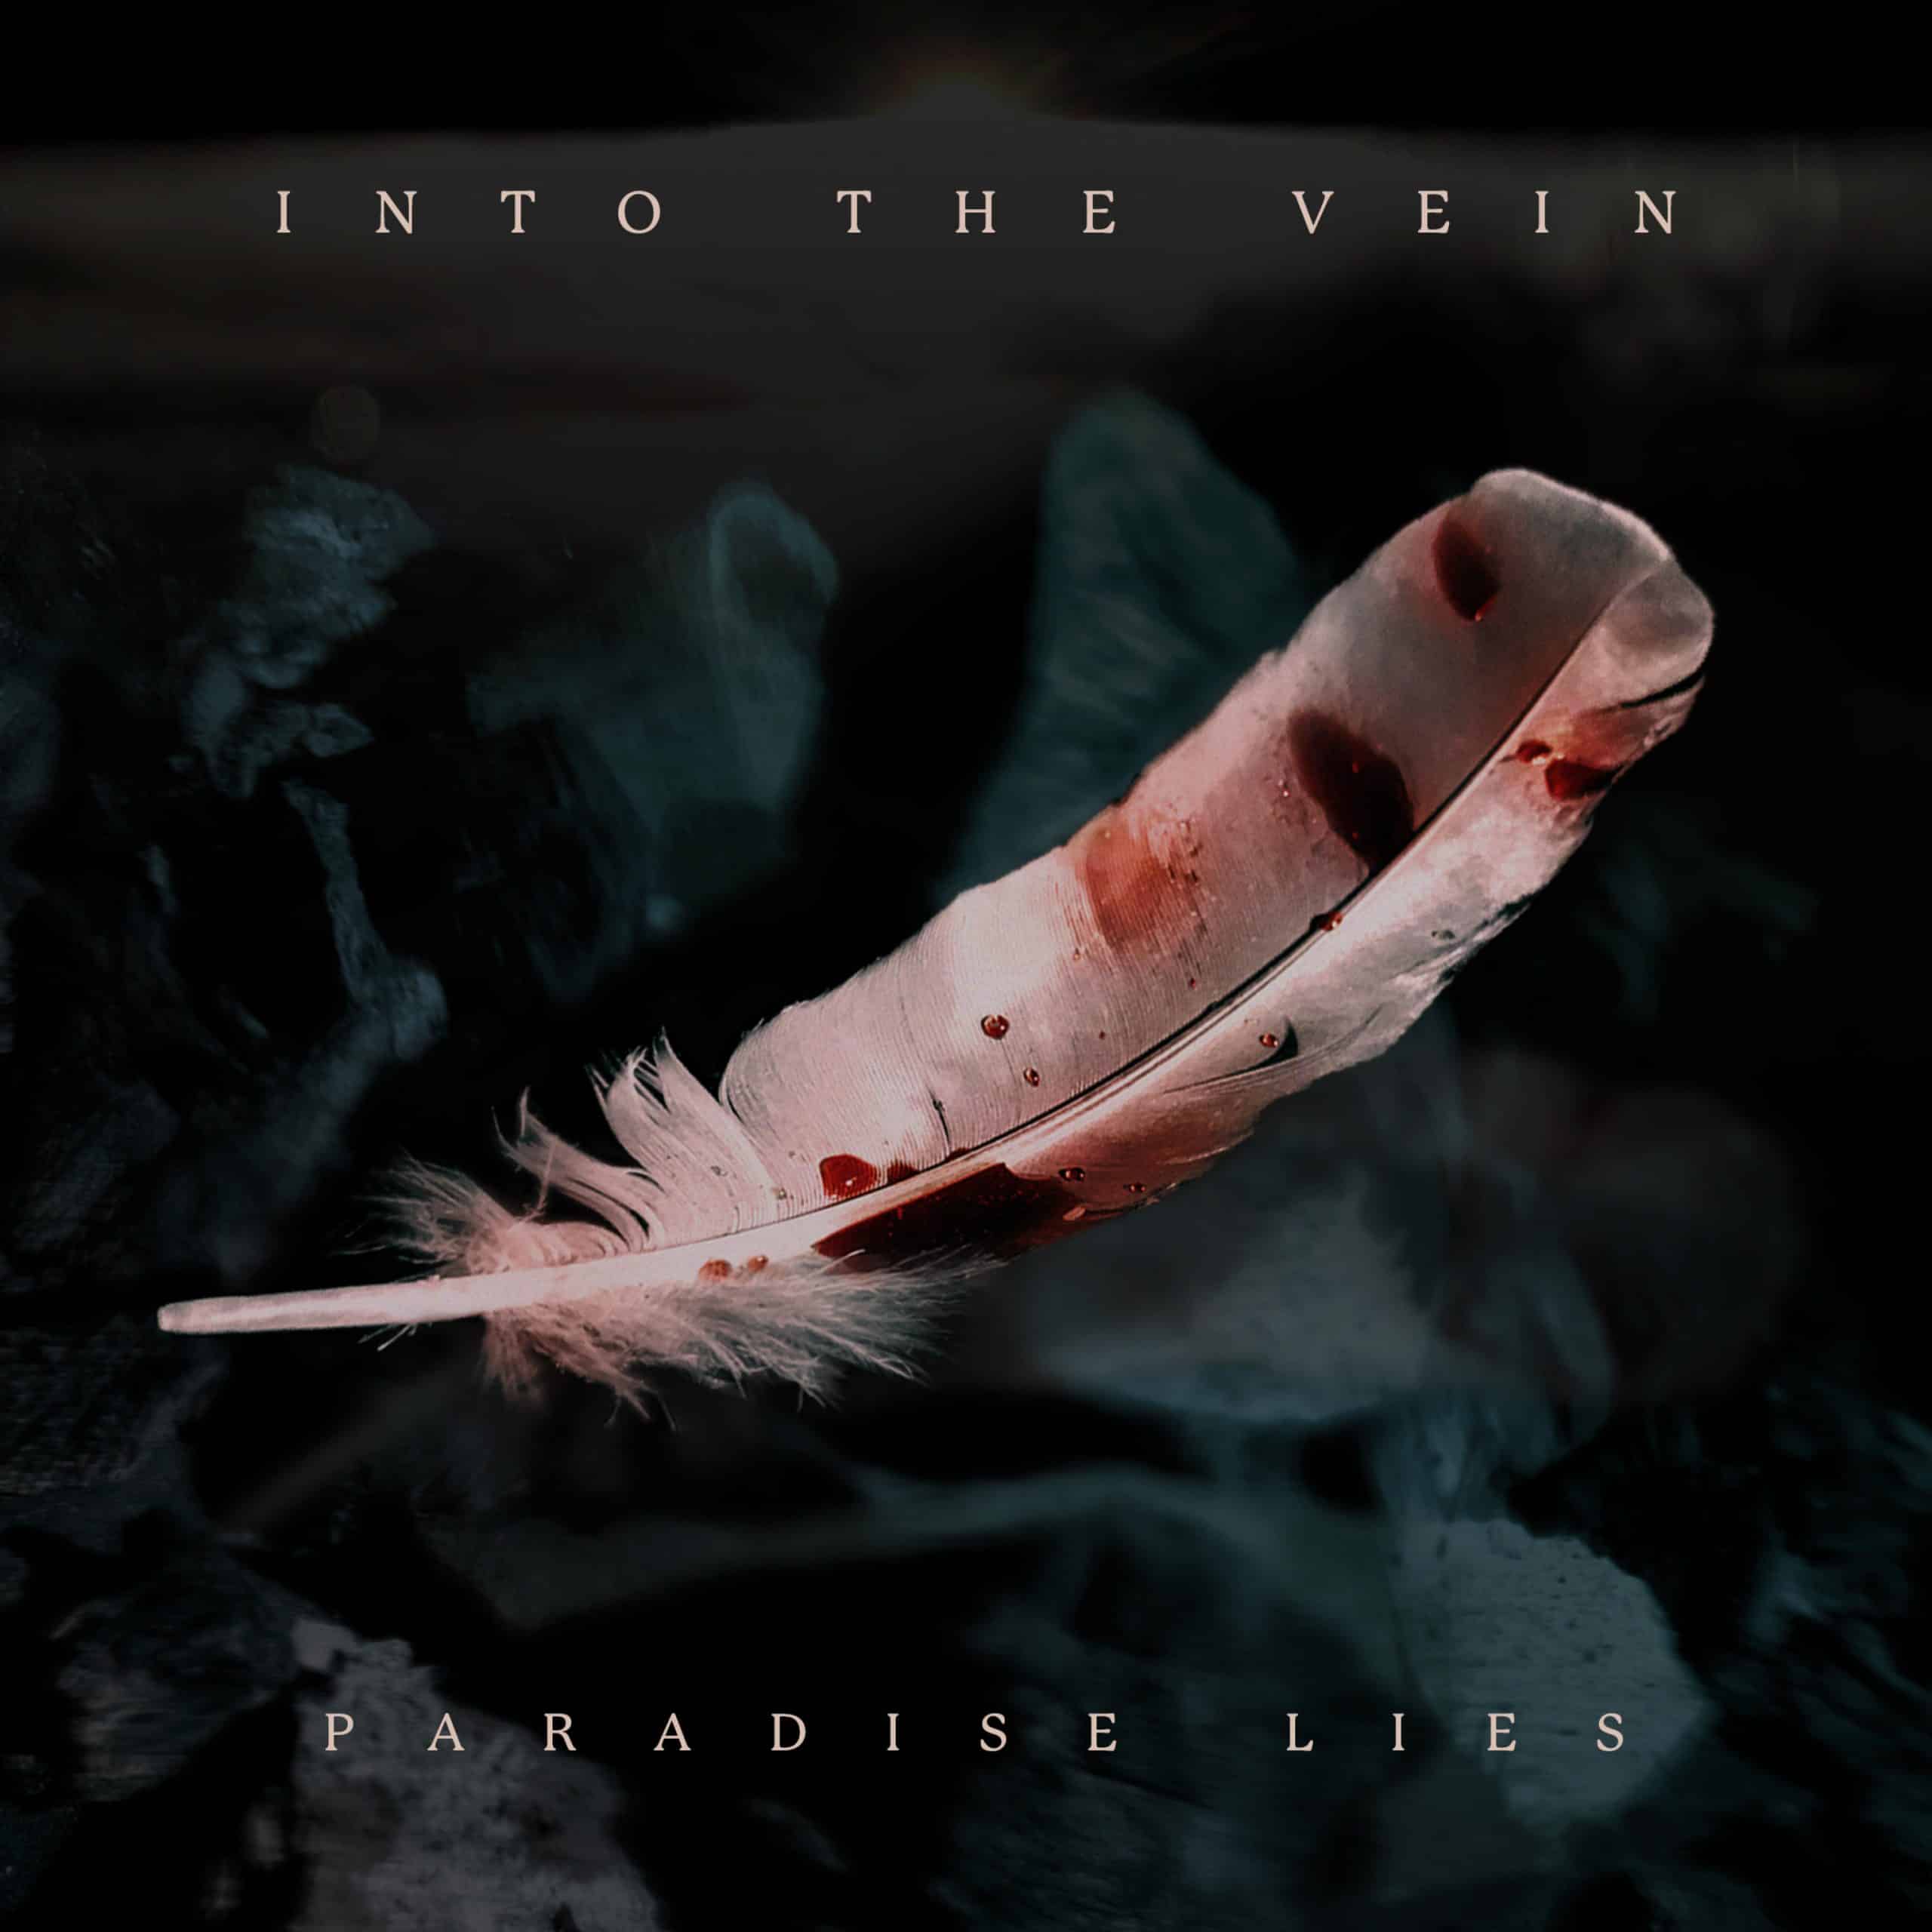 Into The Vein – Everyone You Knew [Modern Metal, Metalcore] – Mixed by Dr. Mike Trubetskov at EOL Studios